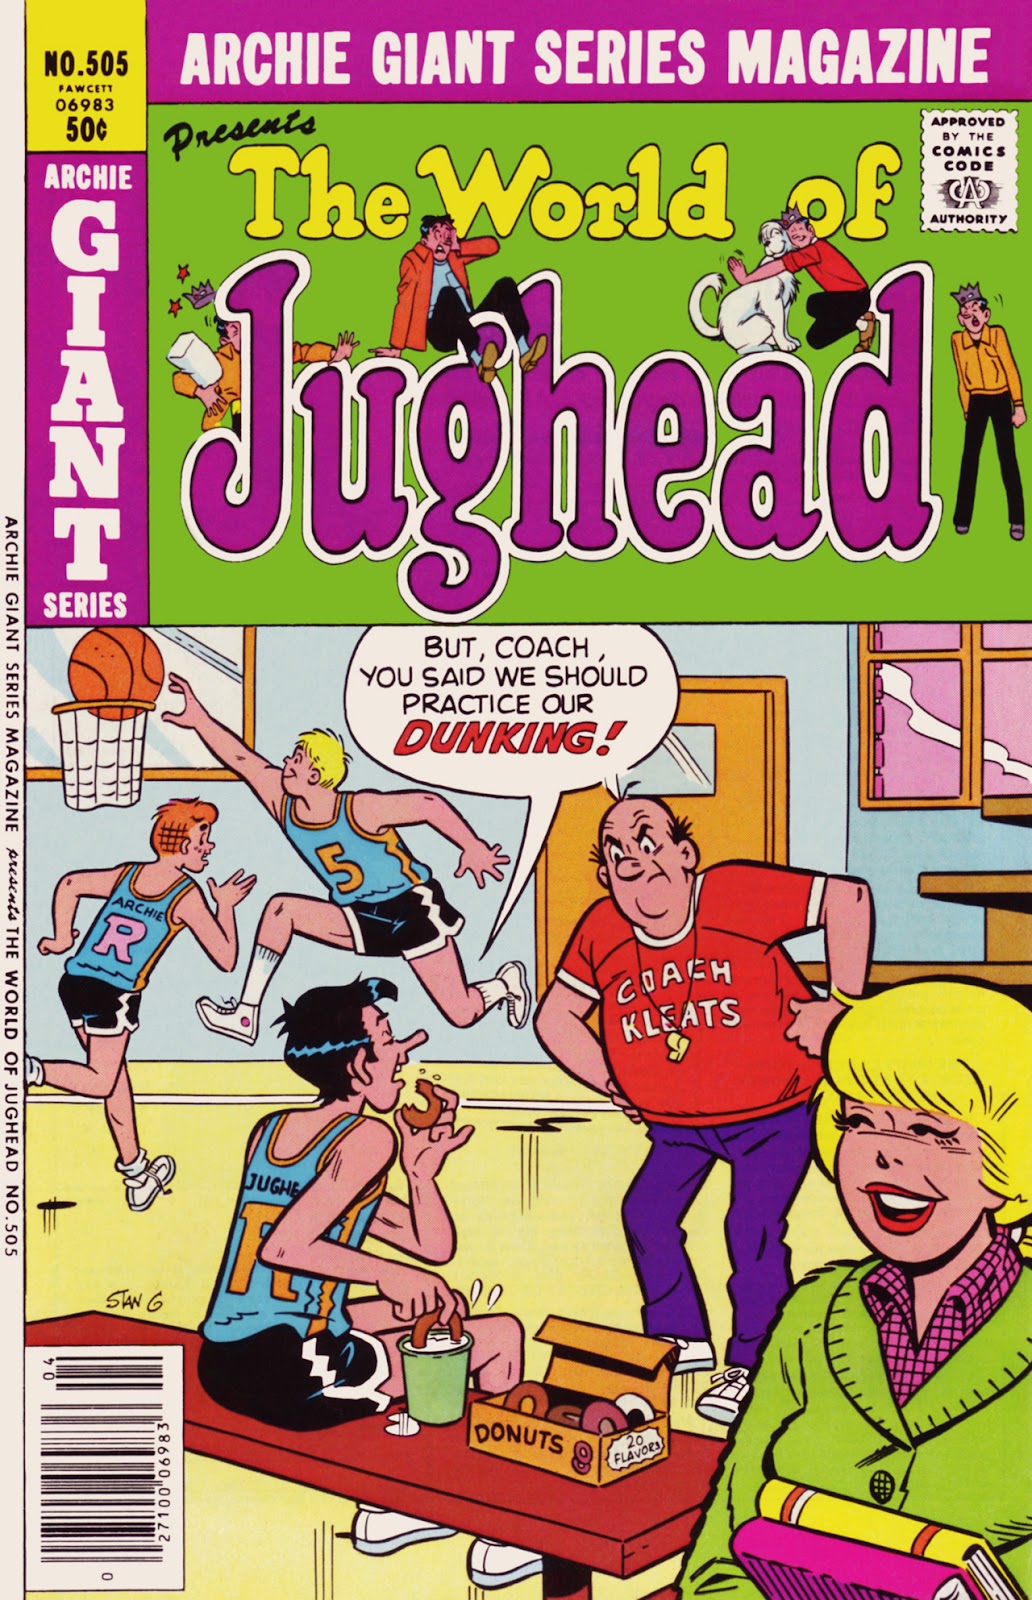 Archie Giant Series Magazine issue 505 - Page 1